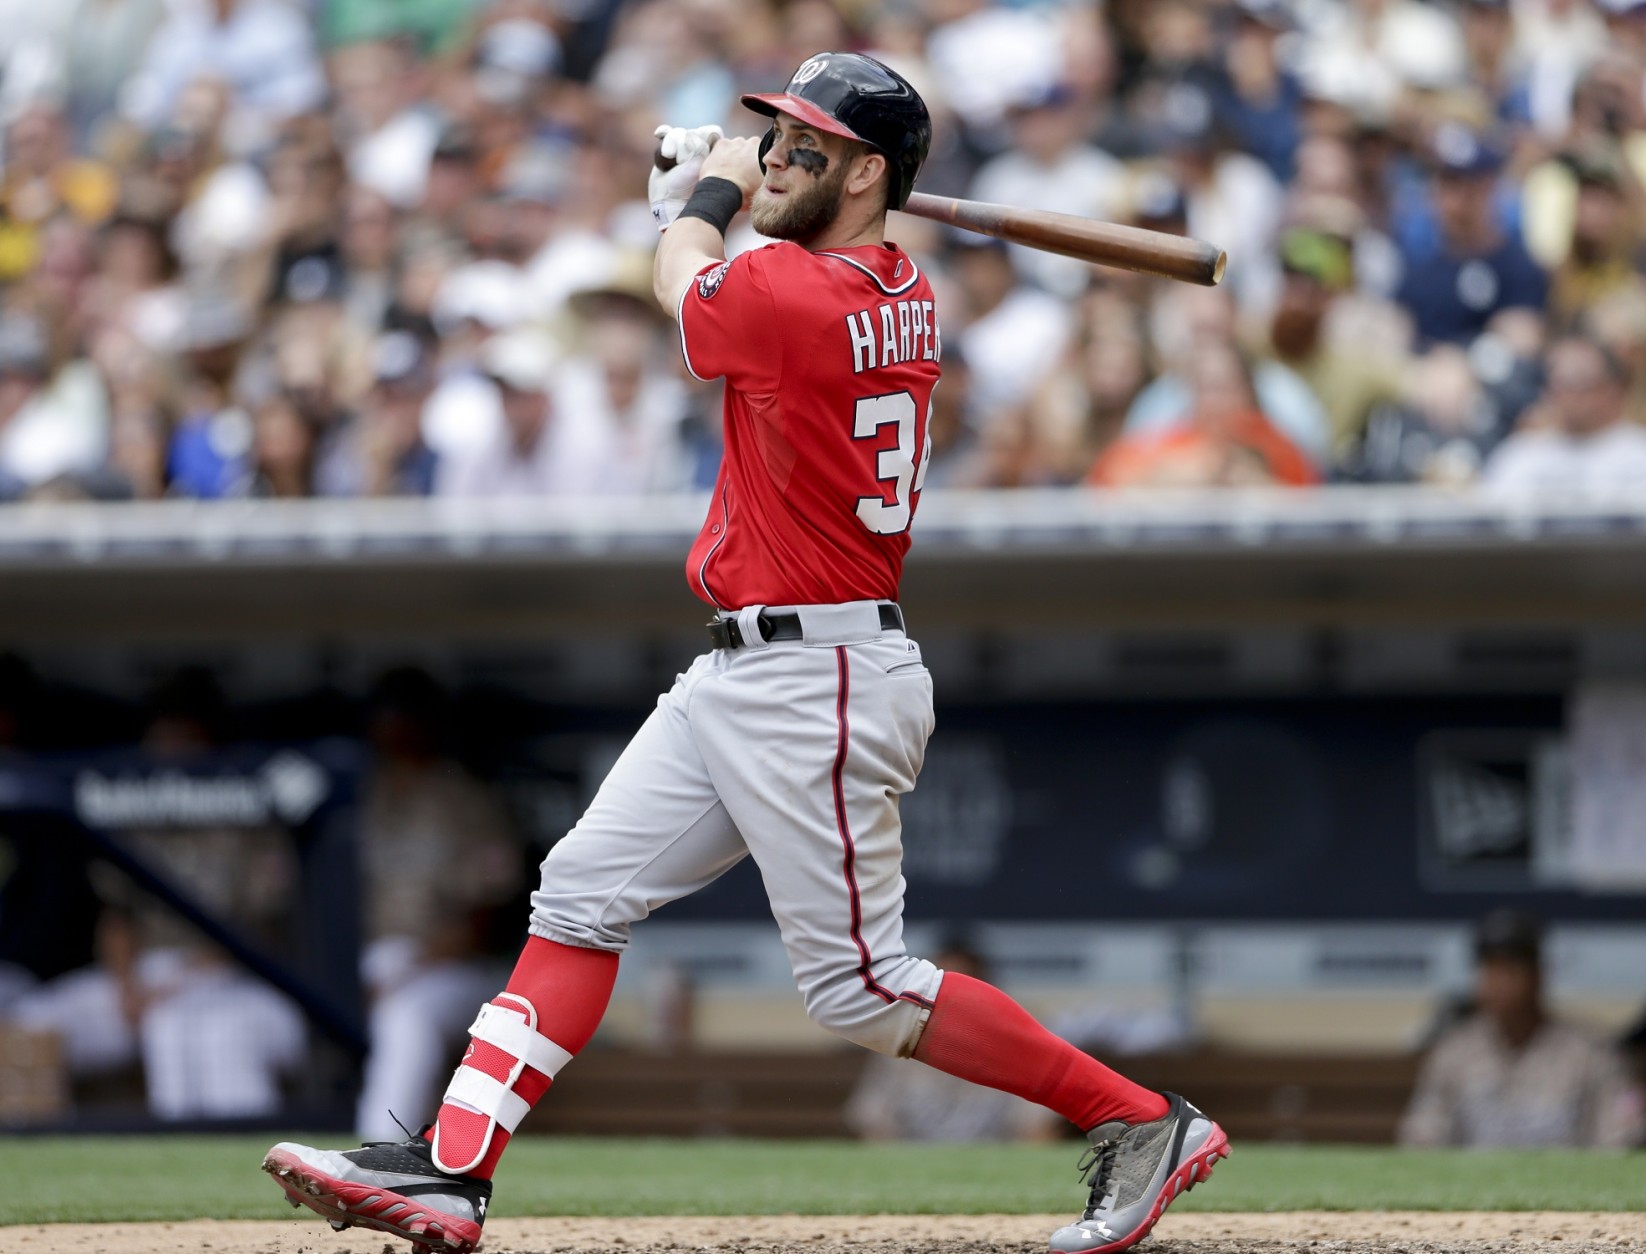 Washington Nationals' Bryce Harper hits a three-run home run during the seventh inning in a baseball game against the San Diego Padres, Sunday, May 17, 2015, in San Diego. (AP Photo/Gregory Bull)